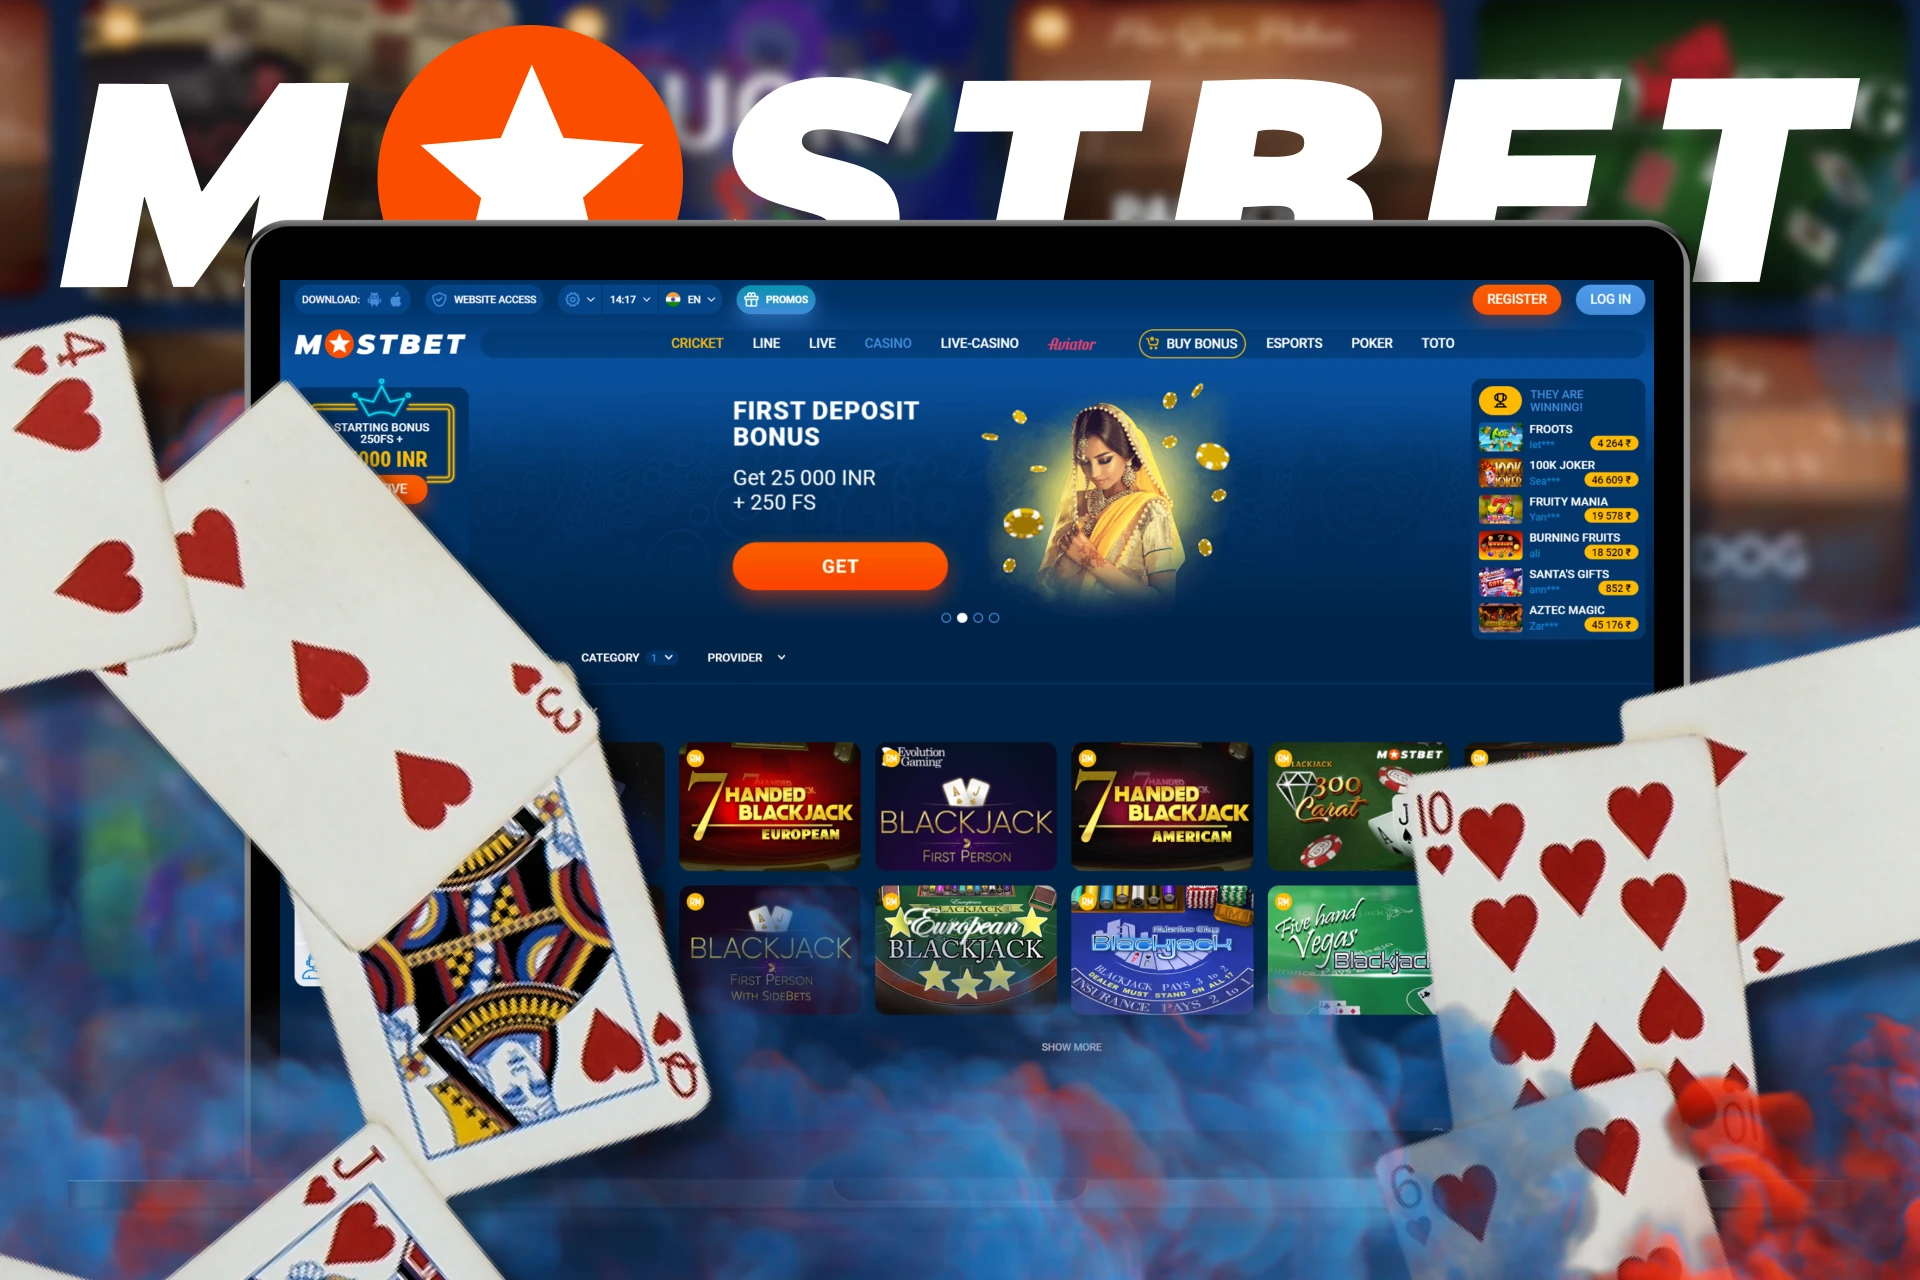 Learn the features of European Blackjack and play it at Mostbet.